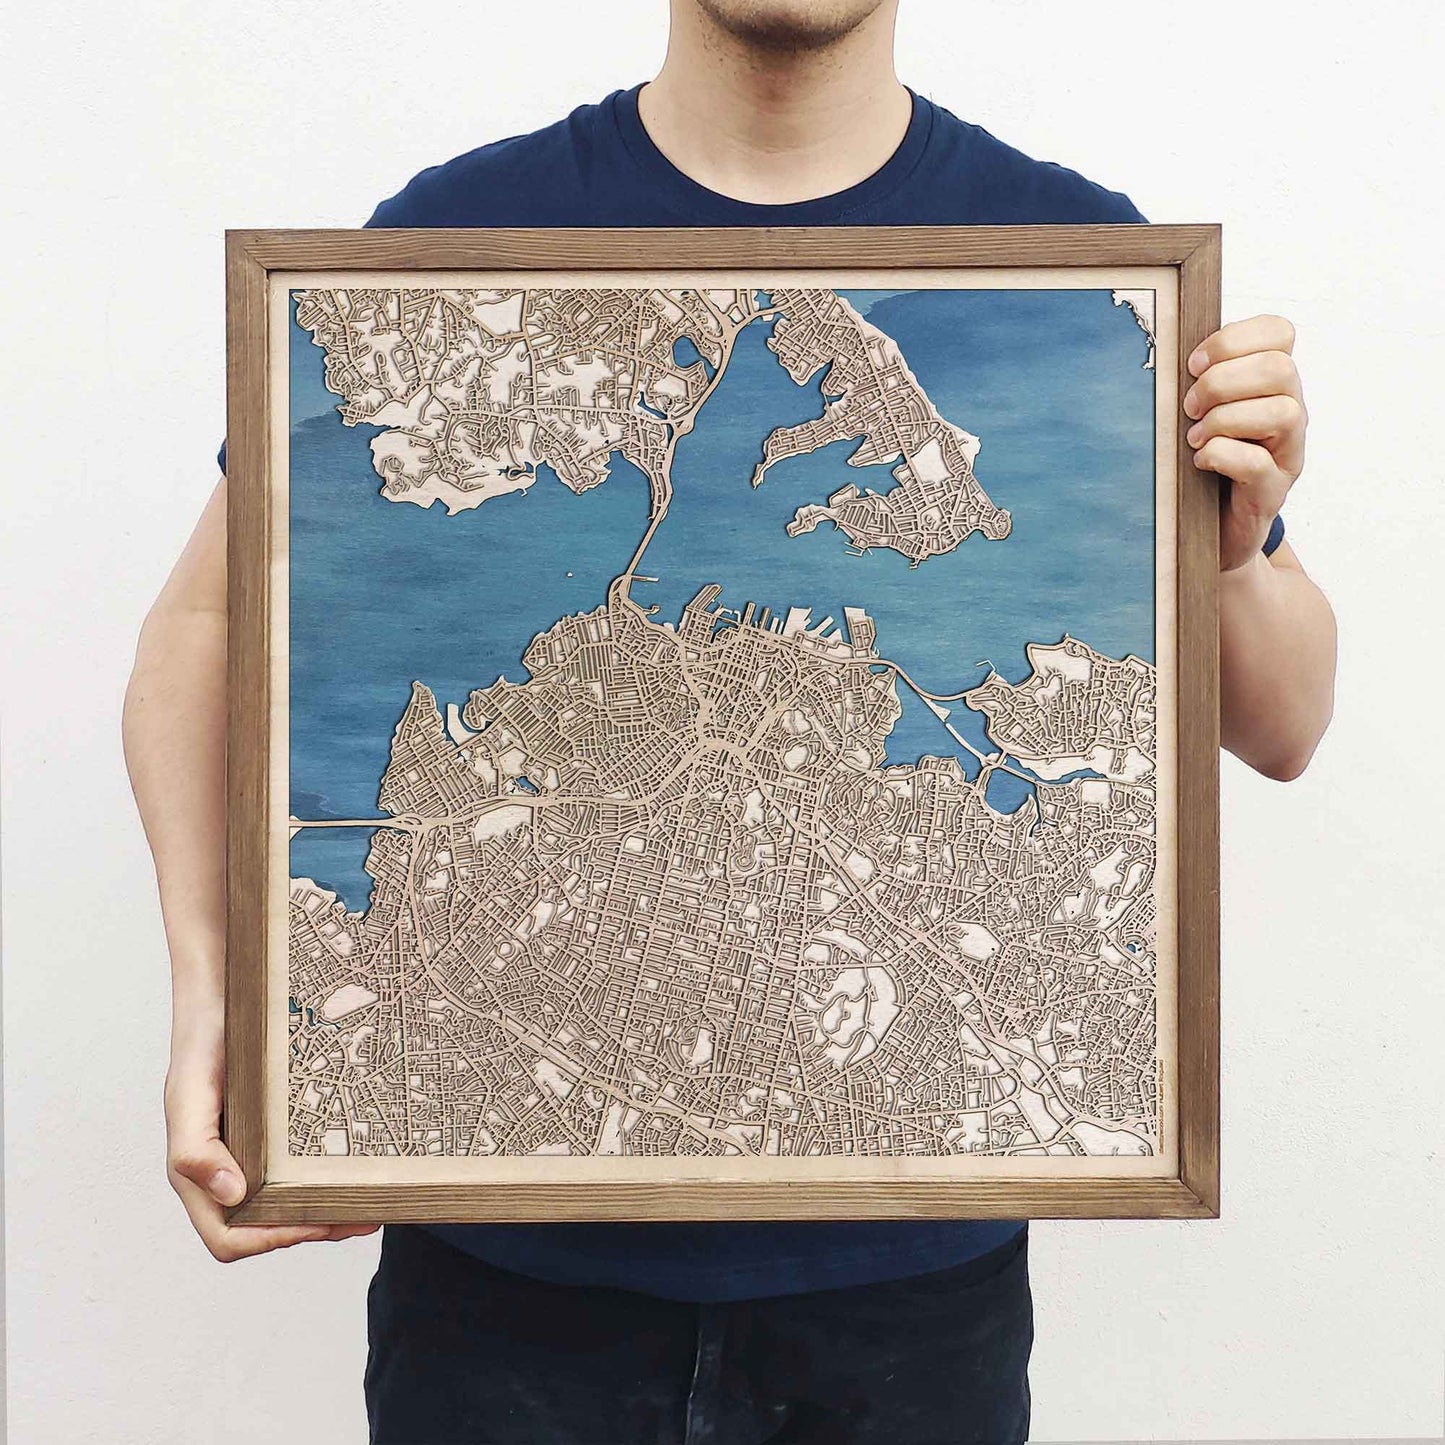 Auckland Wooden Map by CityWood - Custom Wood Map Art - Unique Laser Cut Engraved - Anniversary Gift